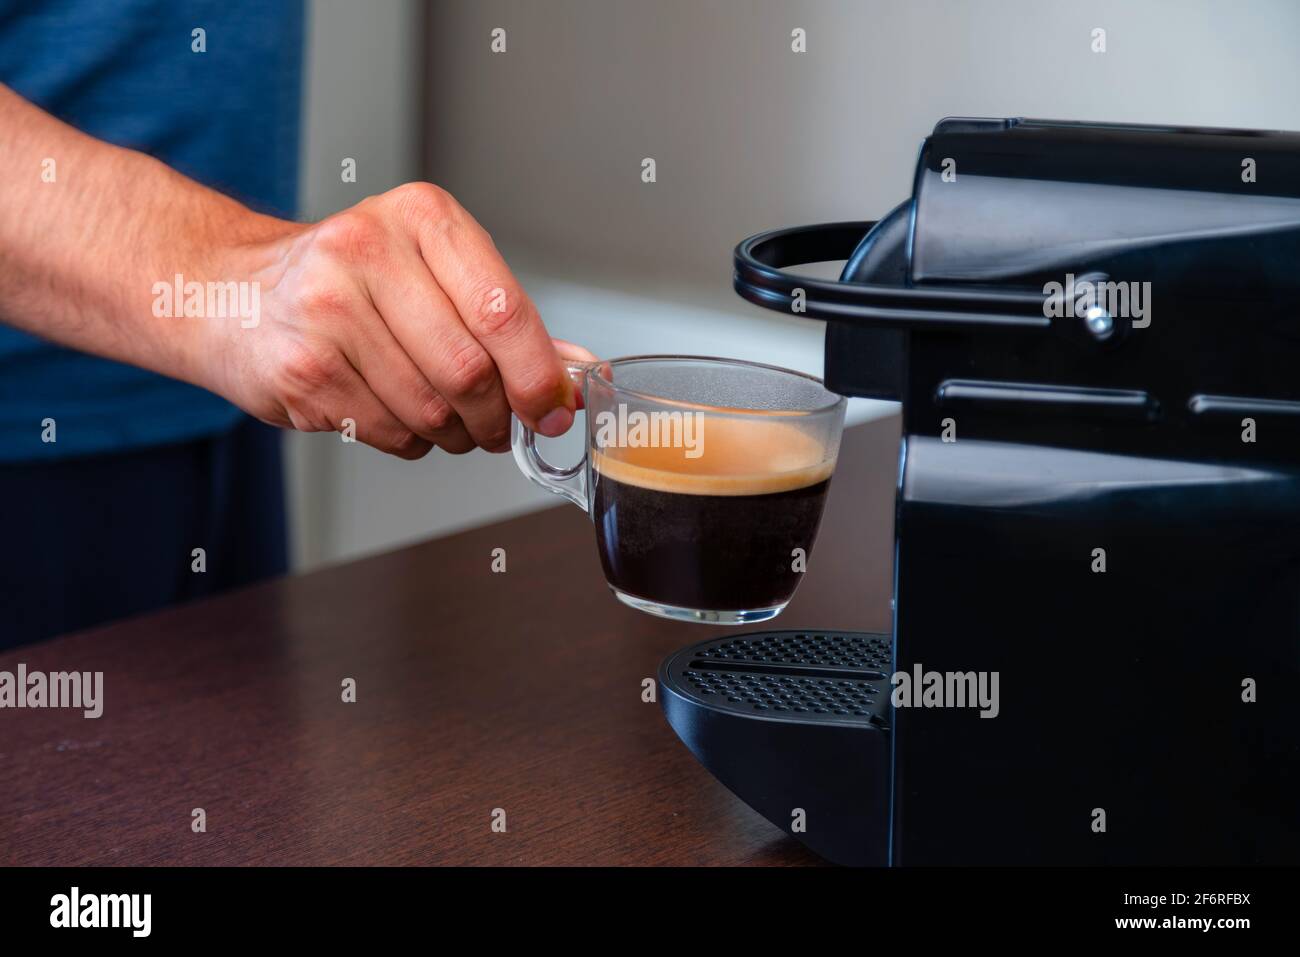 https://c8.alamy.com/comp/2F6RFBX/close-up-of-hand-picking-up-a-cup-of-espresso-of-capsule-coffee-machine-at-home-concept-of-coffee-break-2F6RFBX.jpg